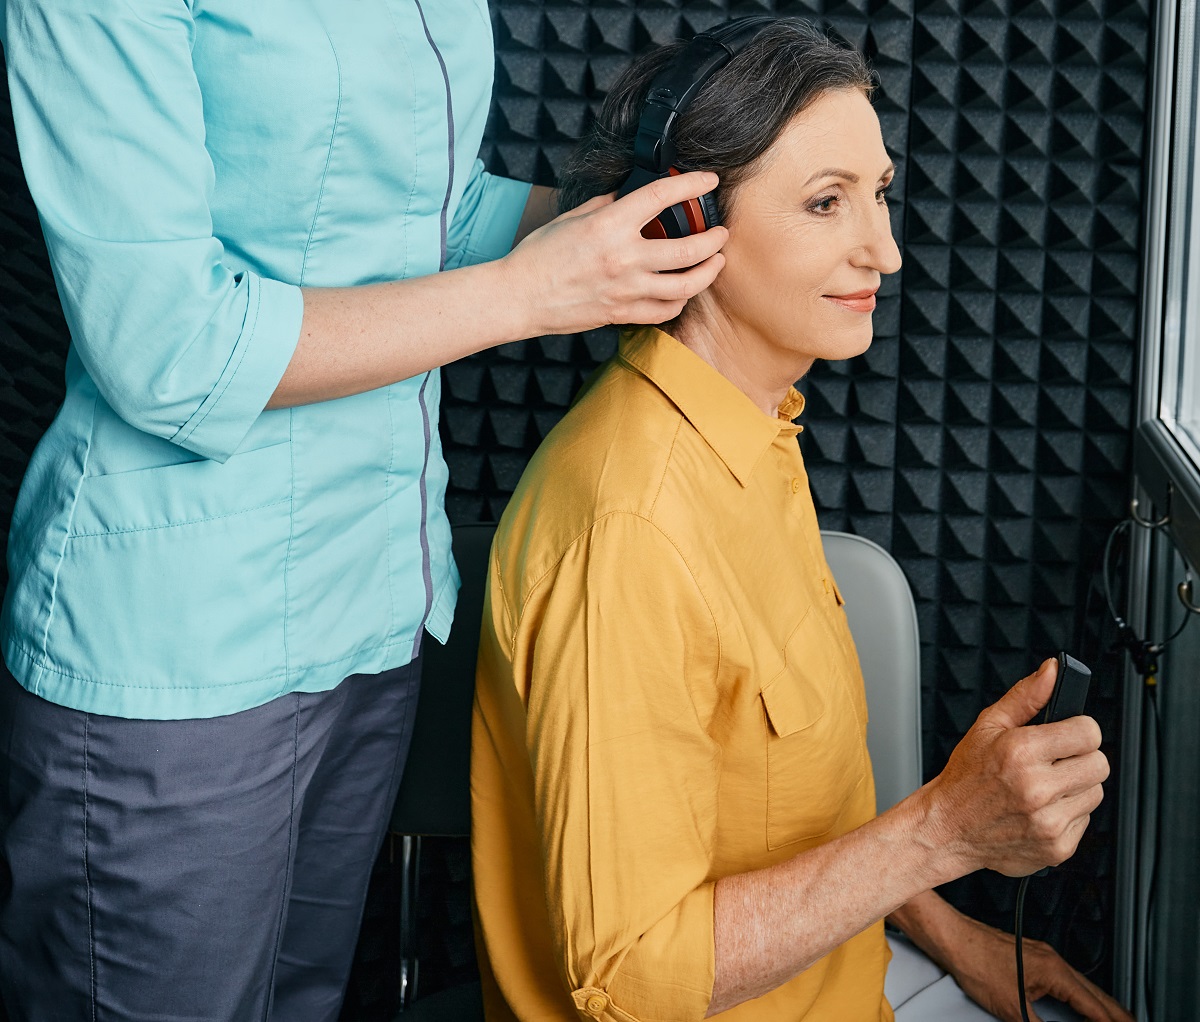 Hearing Test To Mature Woman. Senior Woman During Hearing Test A